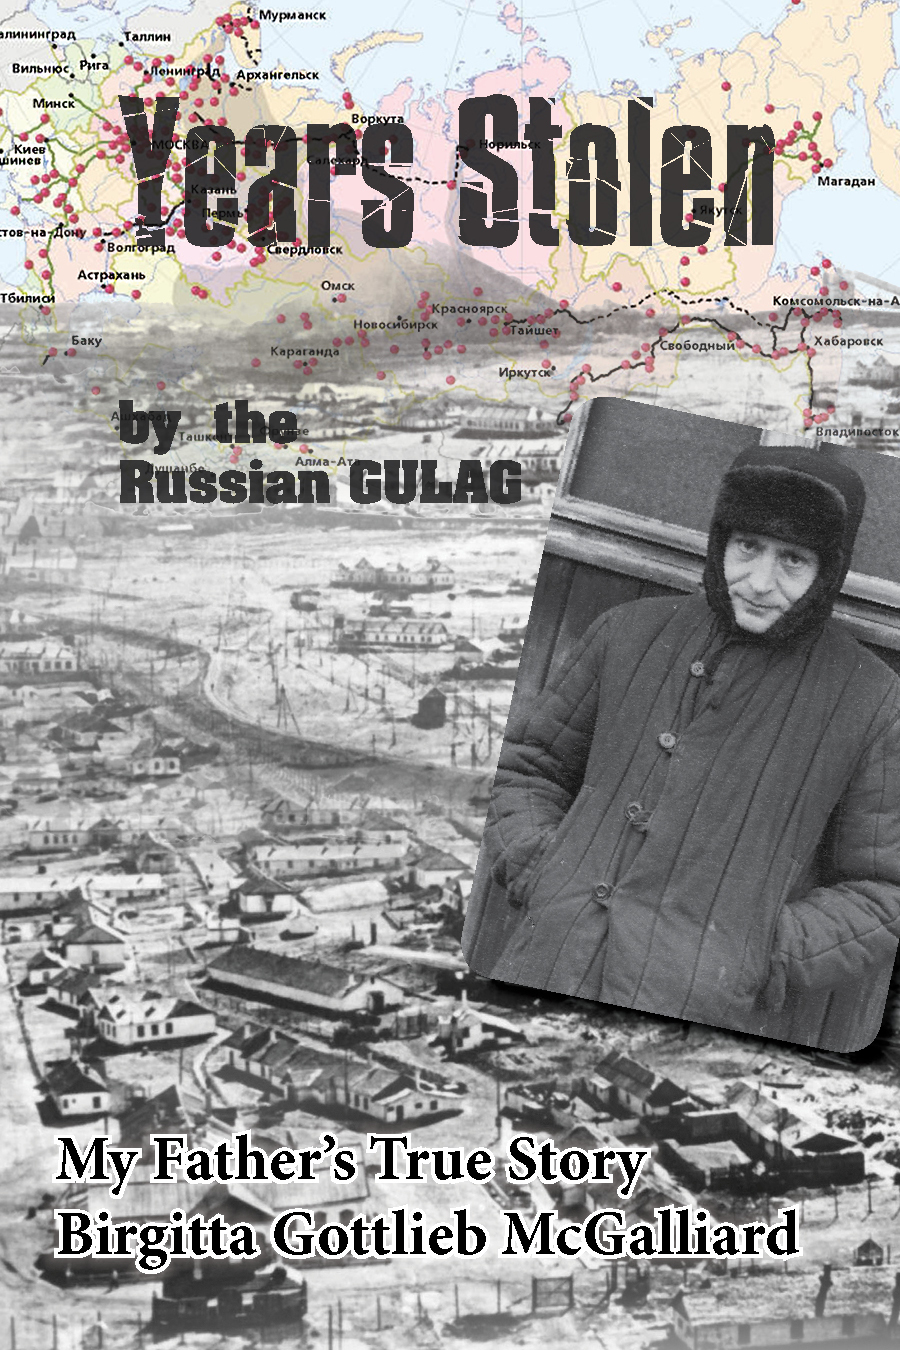 Years Stolen by the Russian GULAG: My Father's True Story